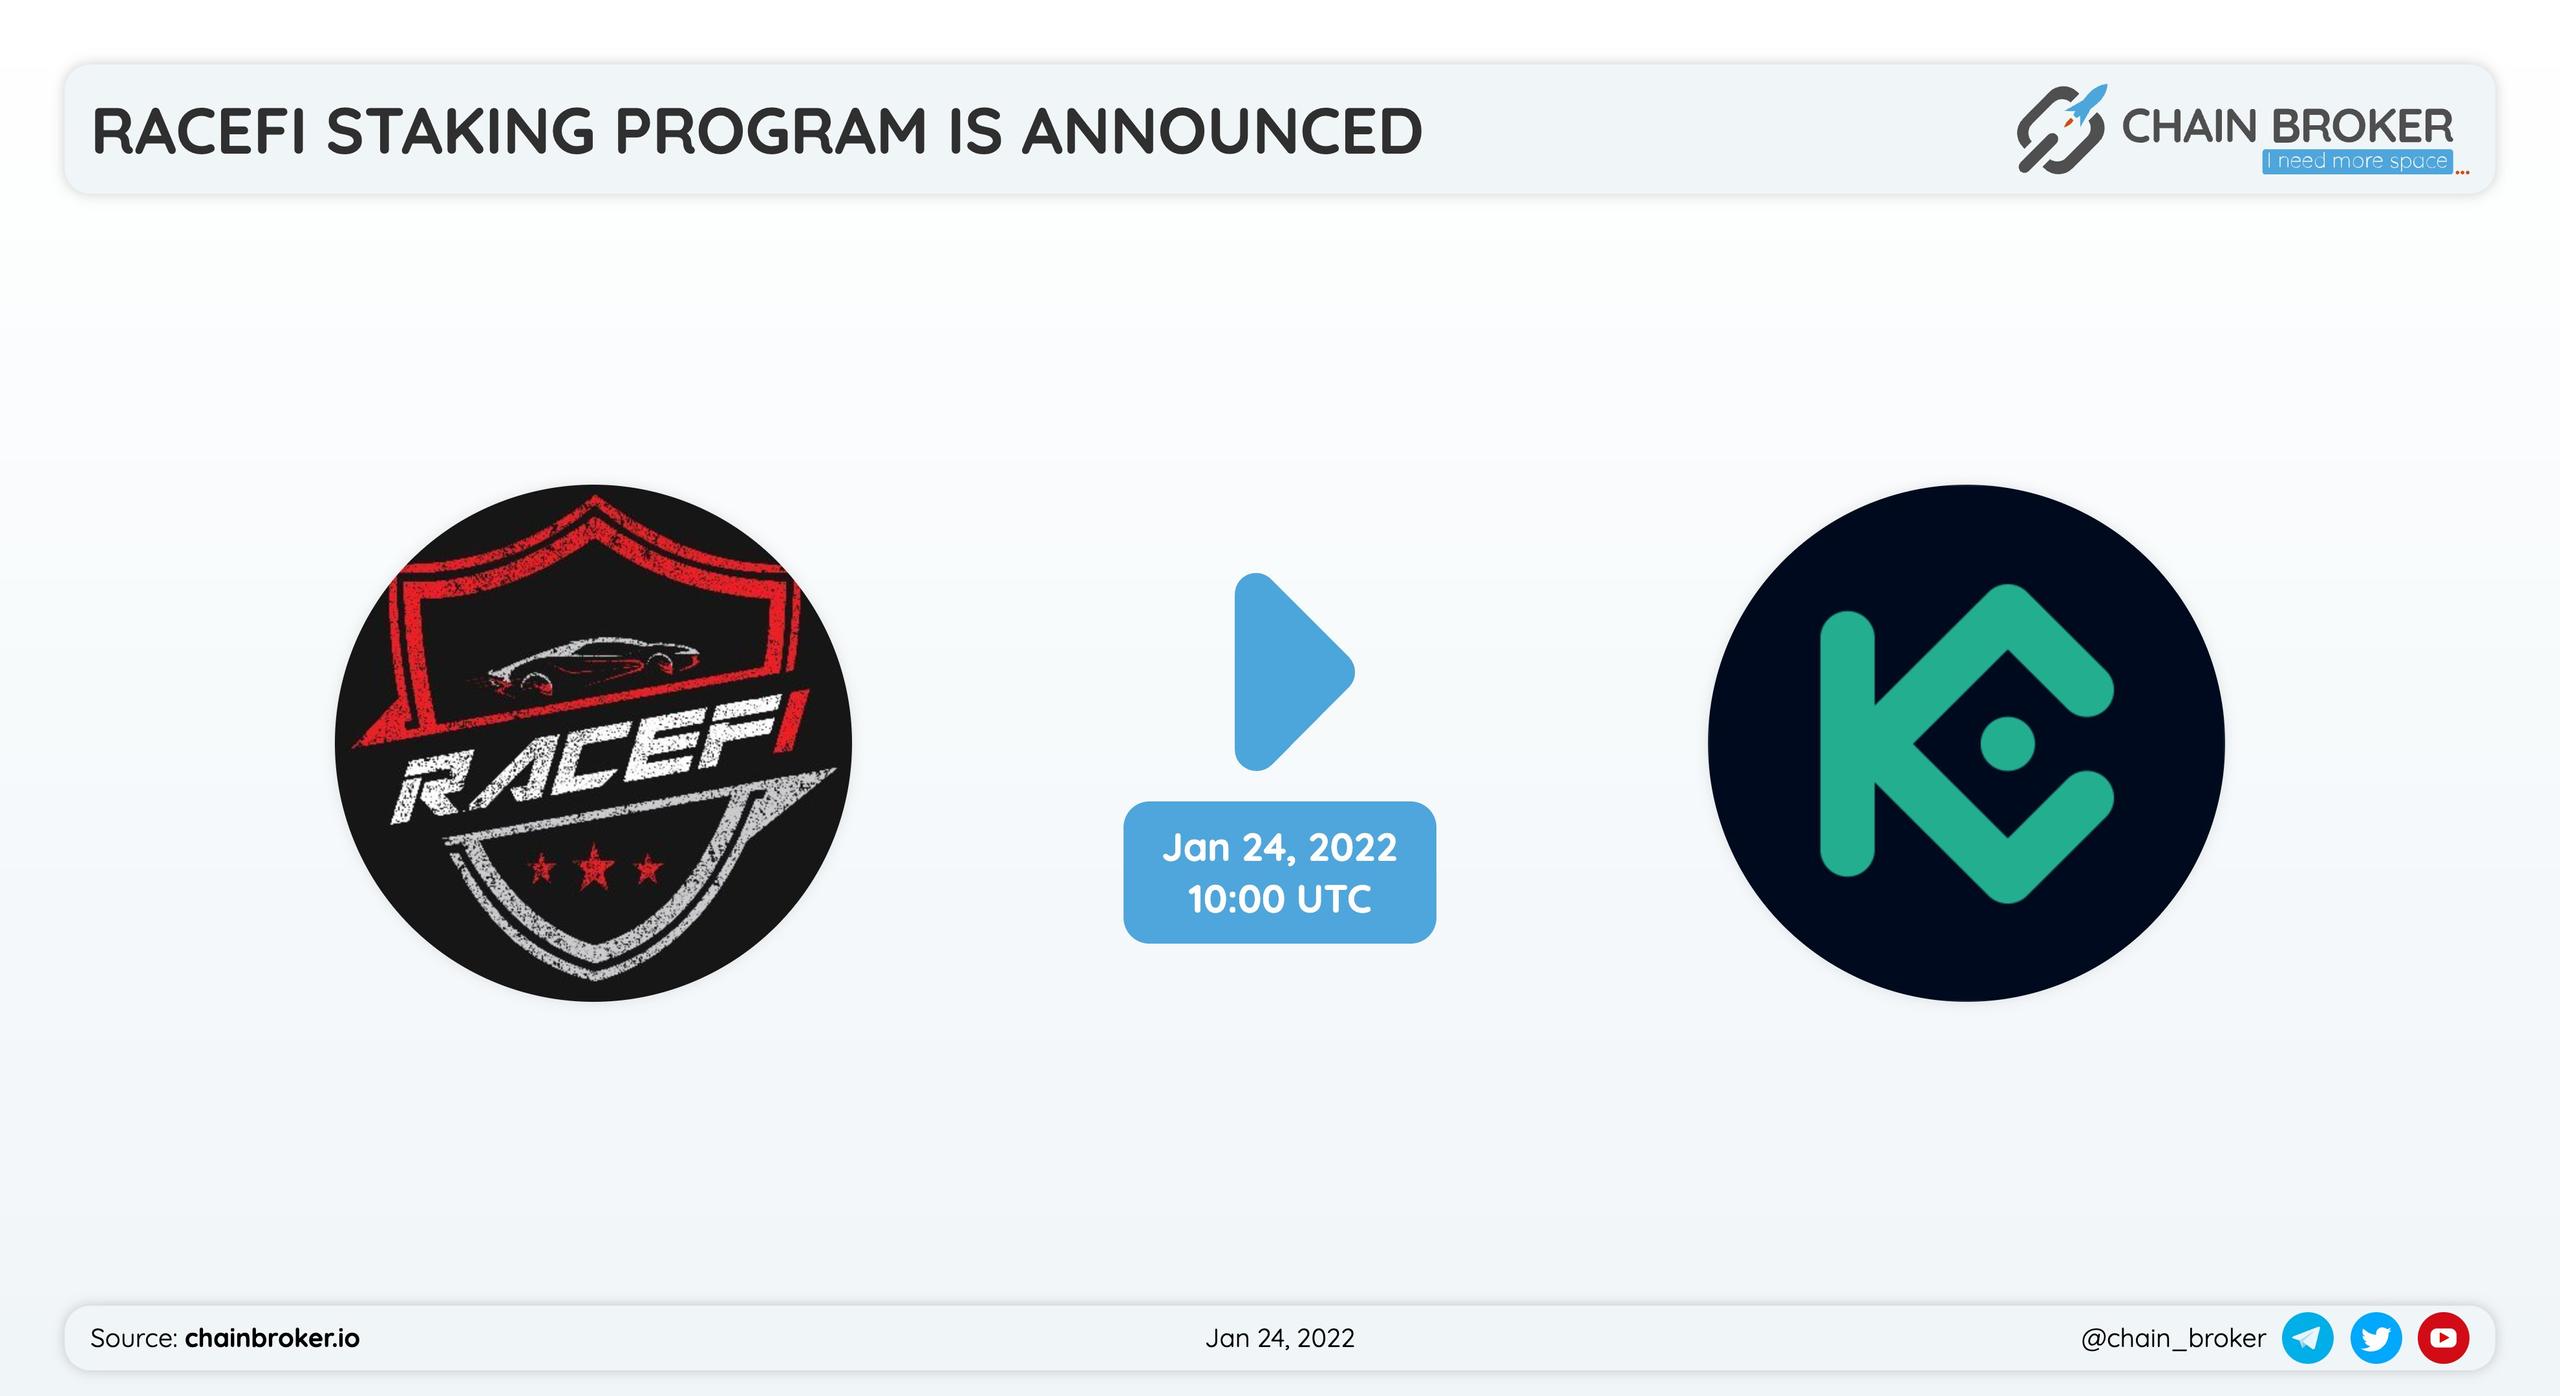 Racefi has partnered with Kucoin for a staking program.